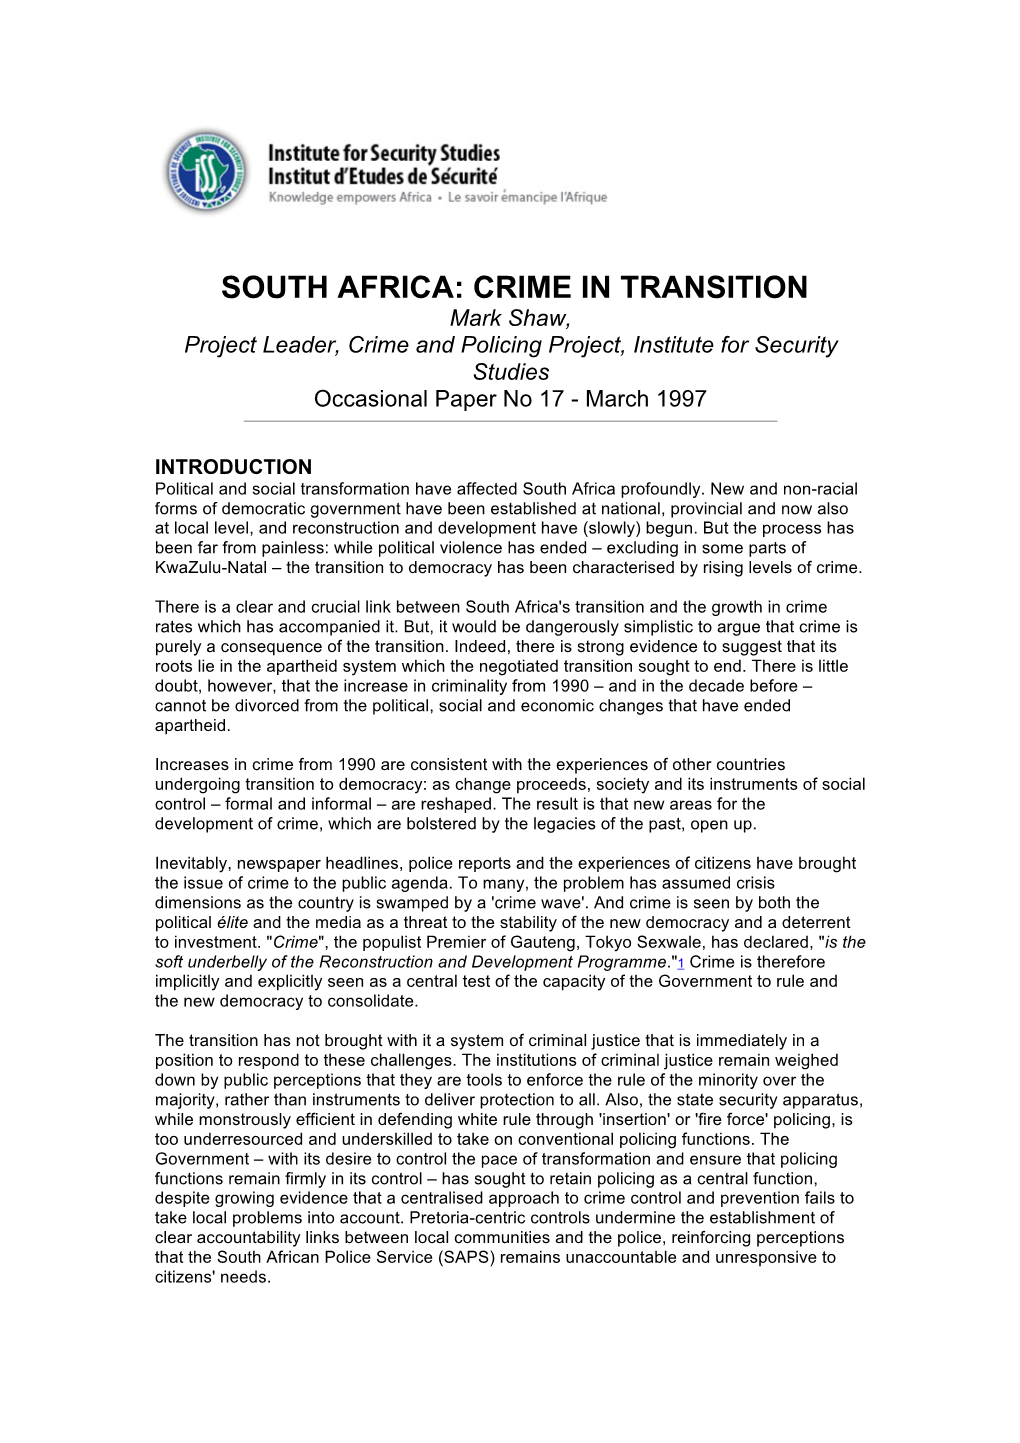 ISS Paper 17: South Africa: Crime in Transition, Mark Shaw